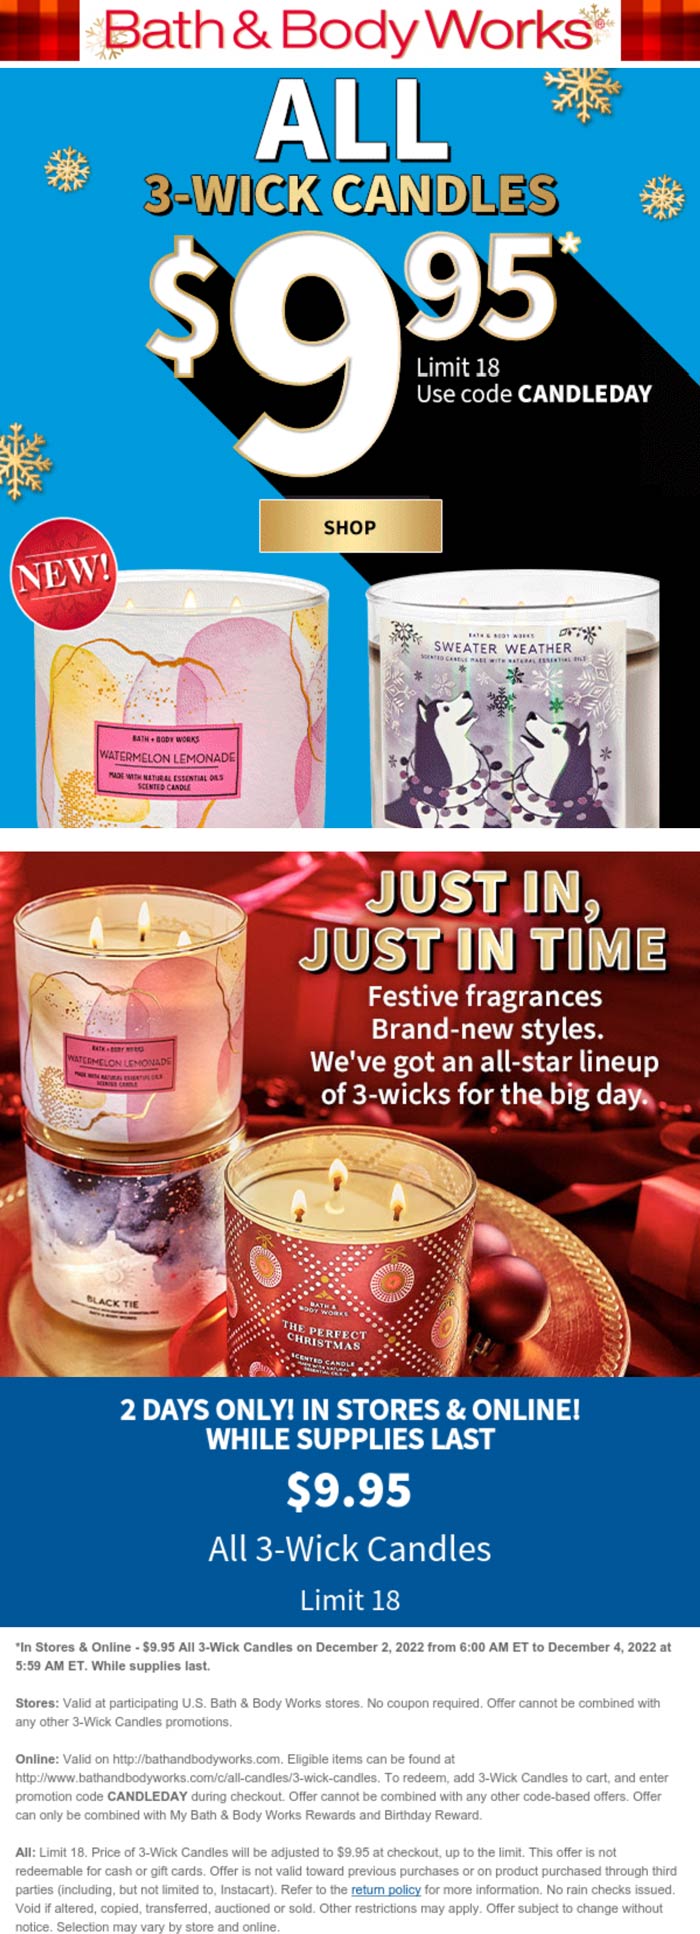 Bath & Body Works stores Coupon  3-wick candles = $10 at Bath & Body Works, ditto online #bathbodyworks 